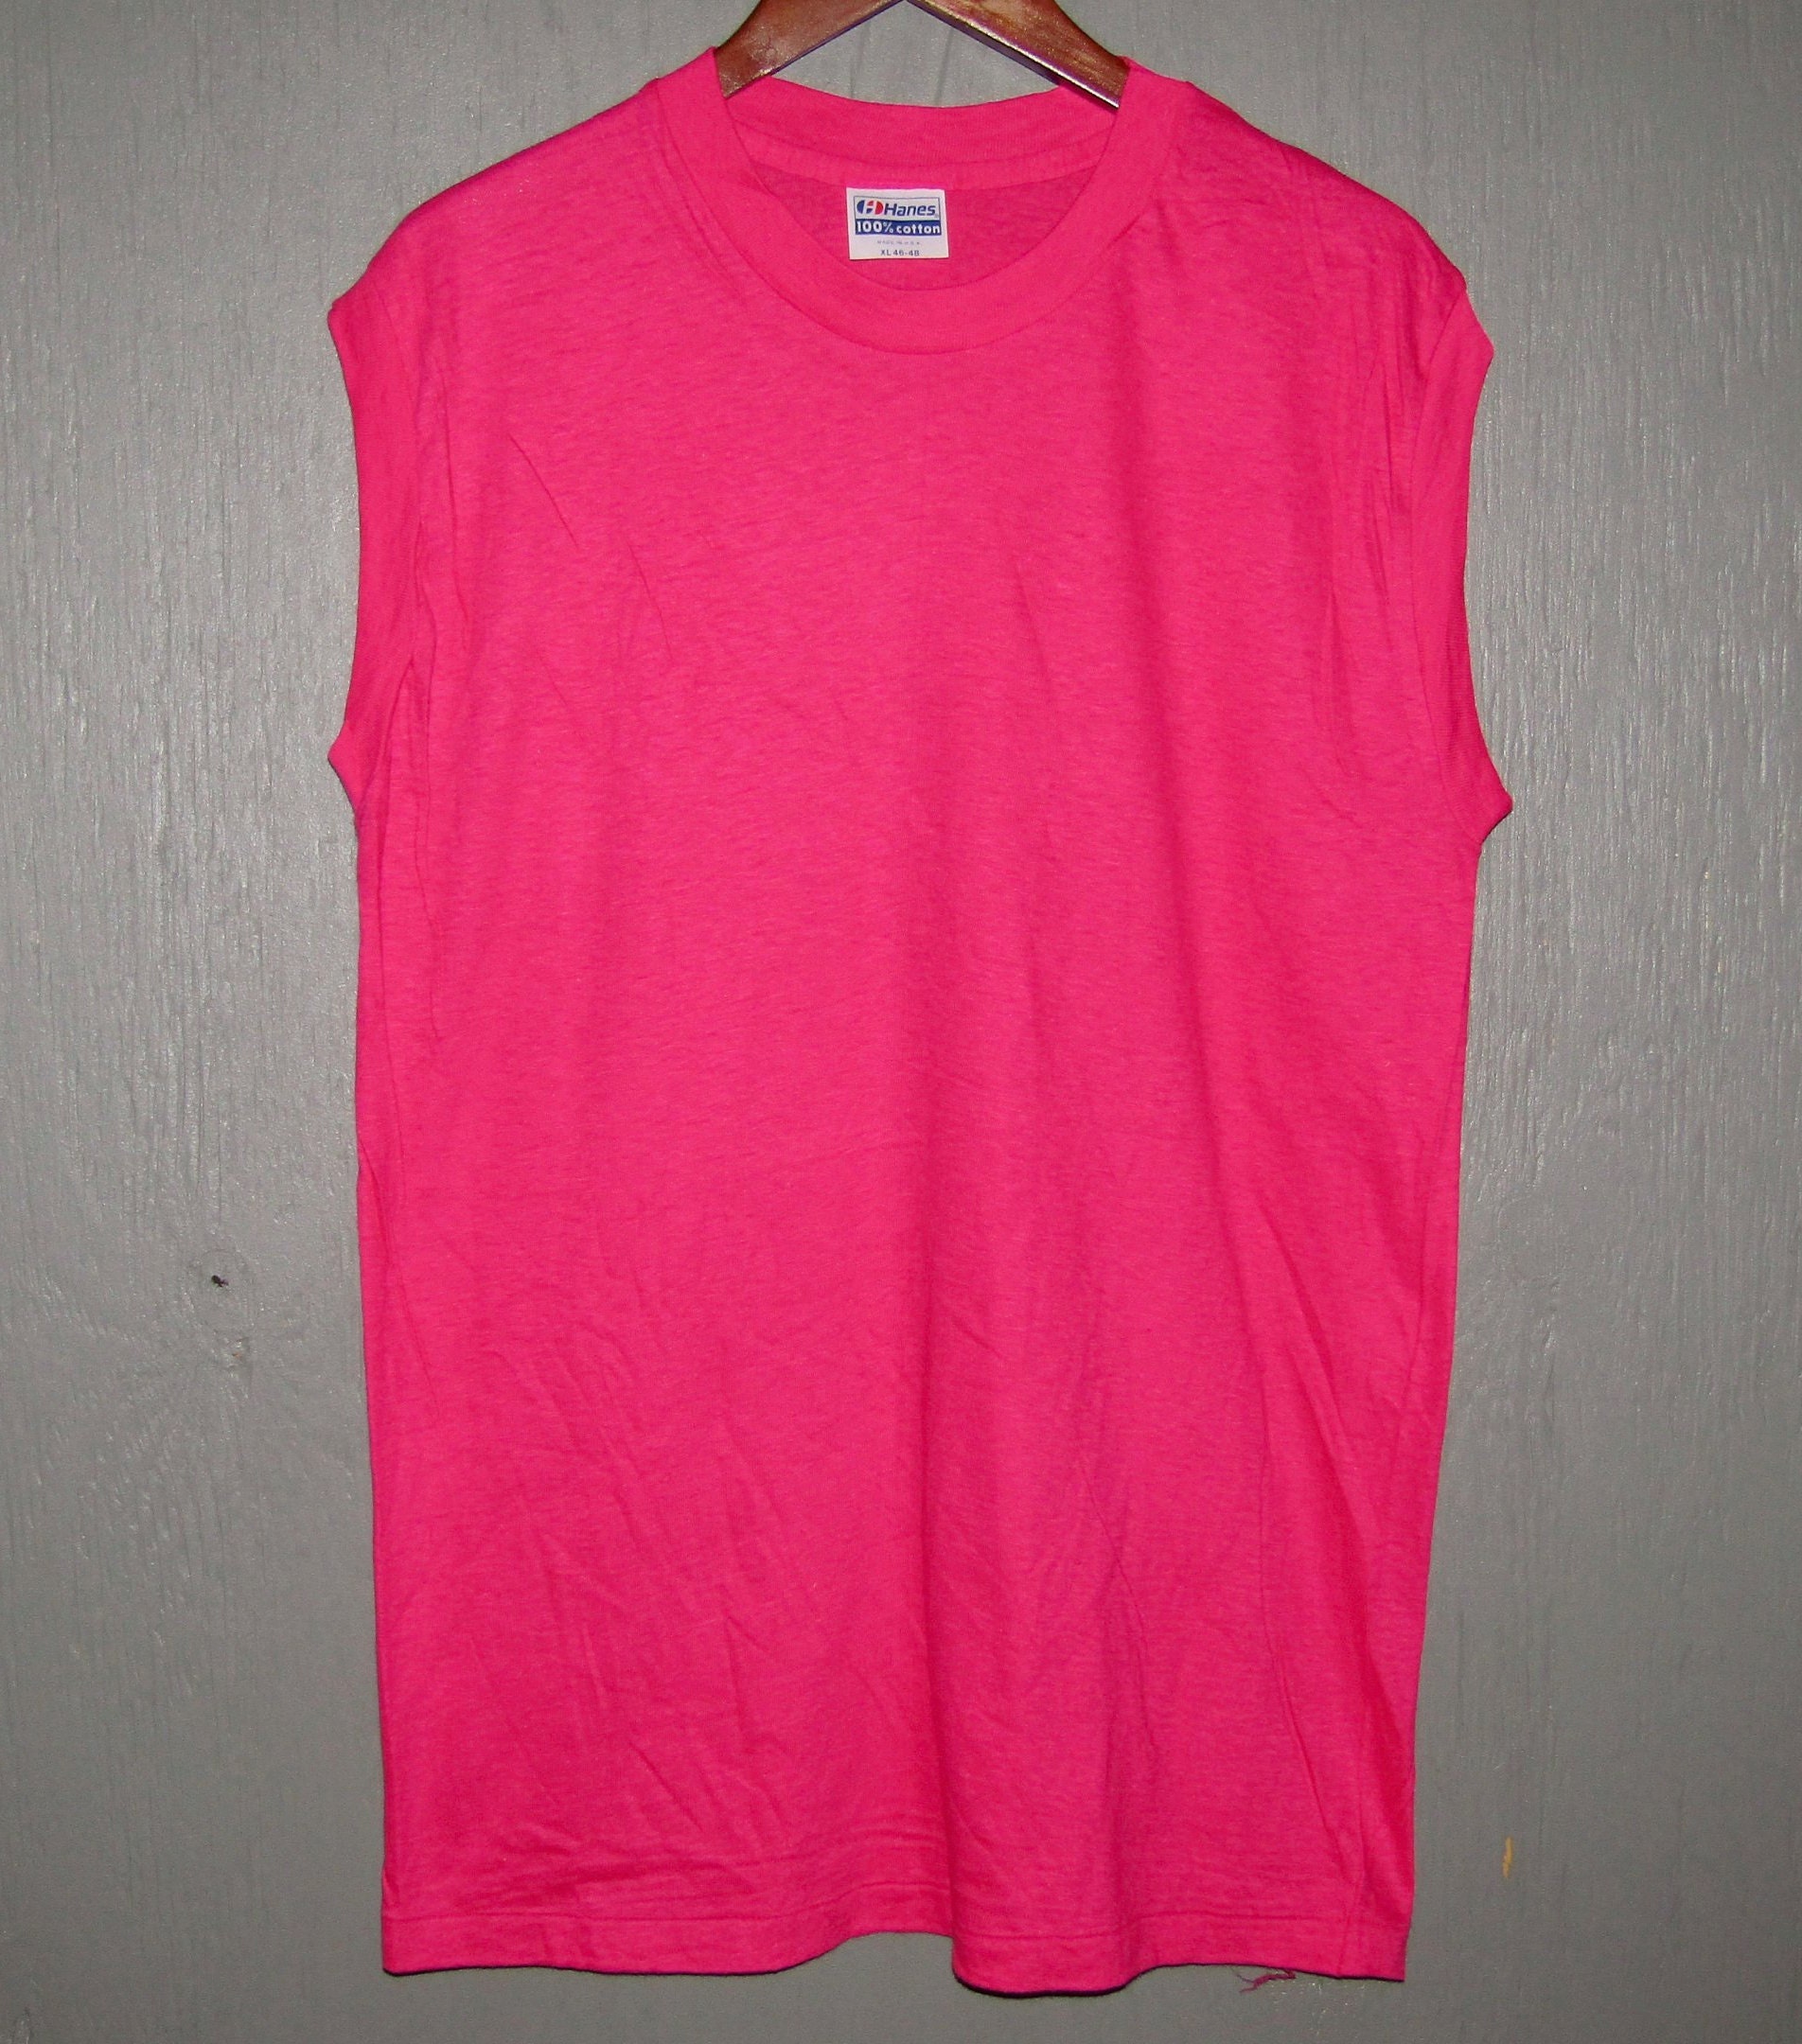 L * NOS vtg 80s Blank Hanes muscle t shirt * 38.166